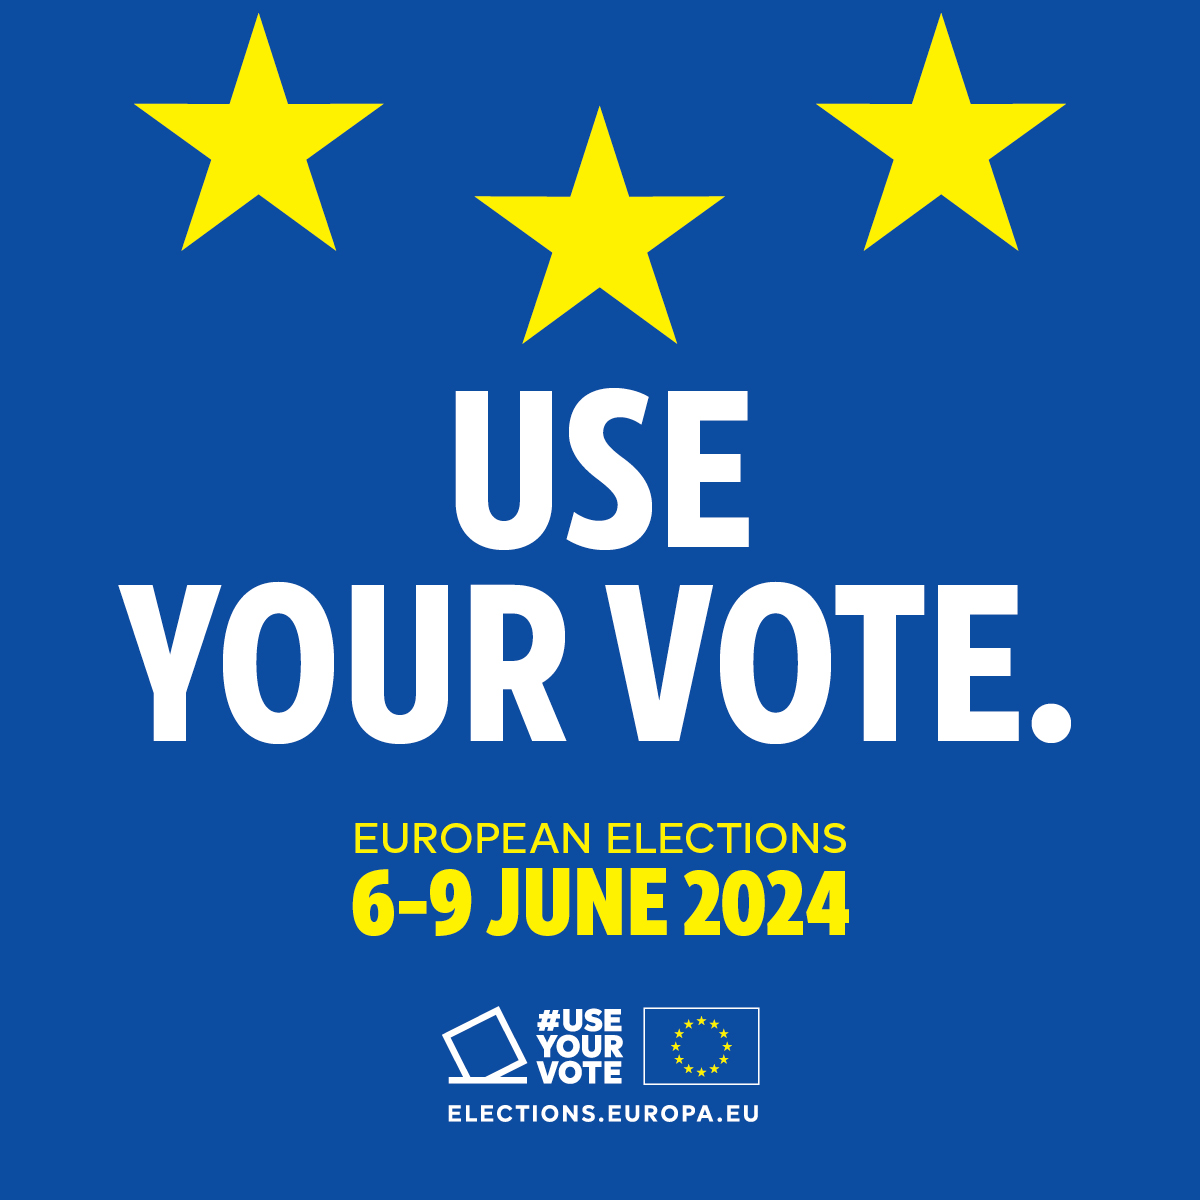 Til alle EU borgere i Norge!🇪🇺 Er du usikker på hvordan du kan stemme ved #EUelections24 mellom 6-9 Juni?🗳️Her er en oversikt over hvordan du kan stemme ved valget!

To all EU citizens in Norway! Here is an overview of how you can vote at the #EUelections24!

#UseYourVote